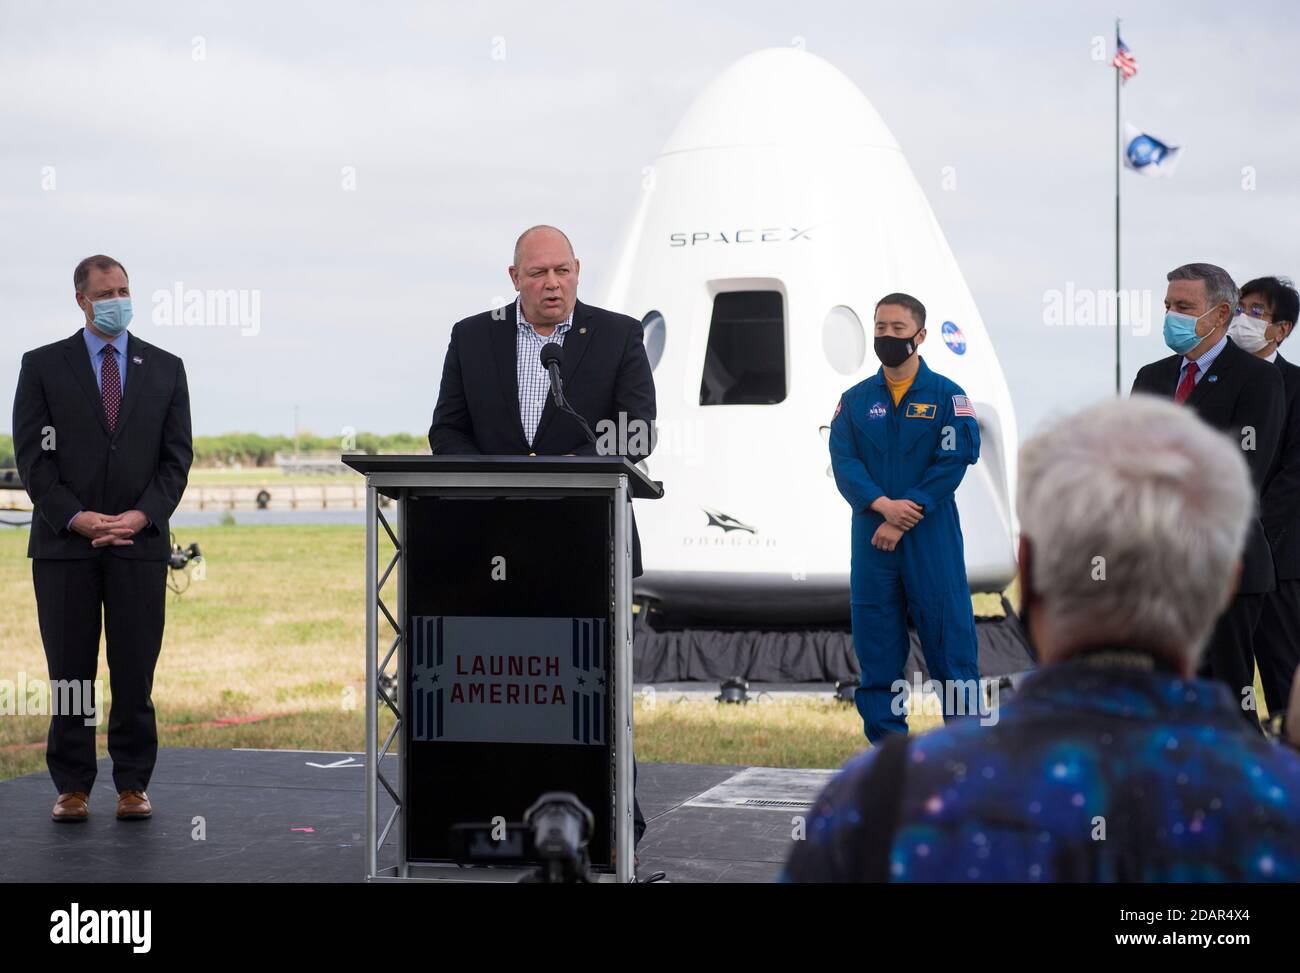 FAA Administrator Stephen Dickson, center, speaks to members of the media during a press conference ahead of the Crew-1 launch at the Kennedy Space Center November 13, 2020 in Cape Canaveral, Florida. Stock Photo